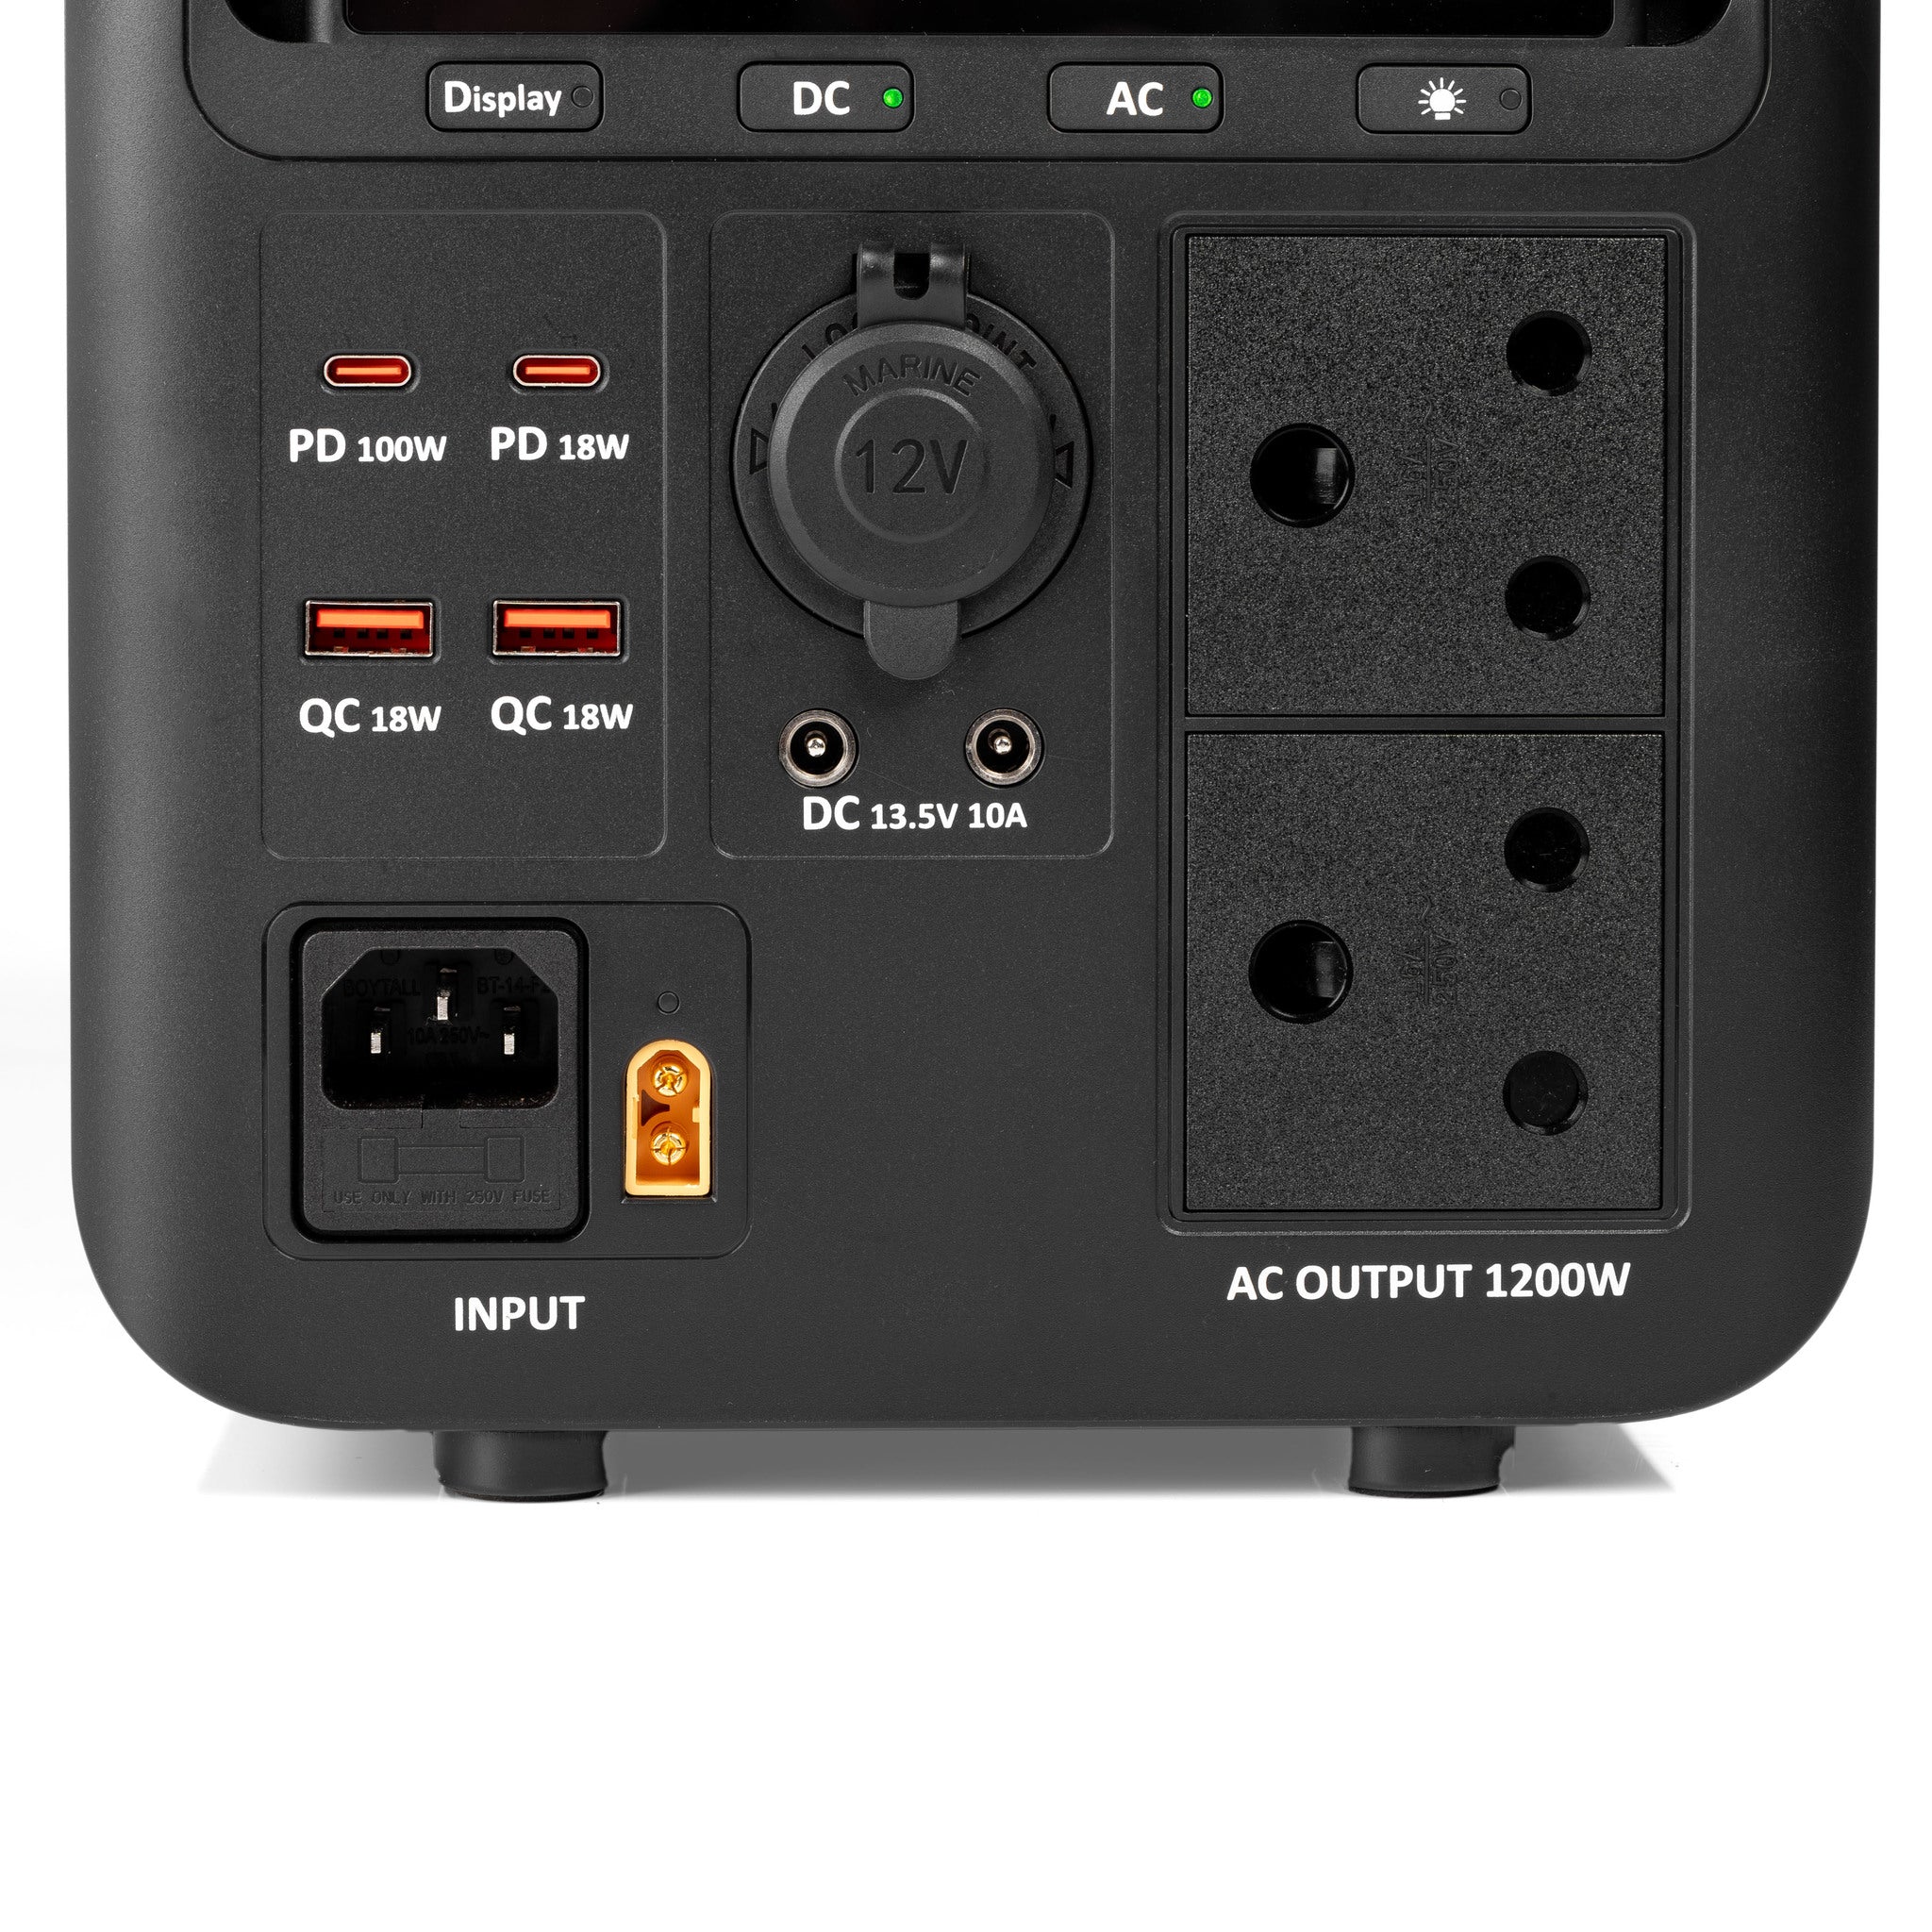 LITHIUM1200 PORTABLE POWER STATION BY FLEXOPOWER